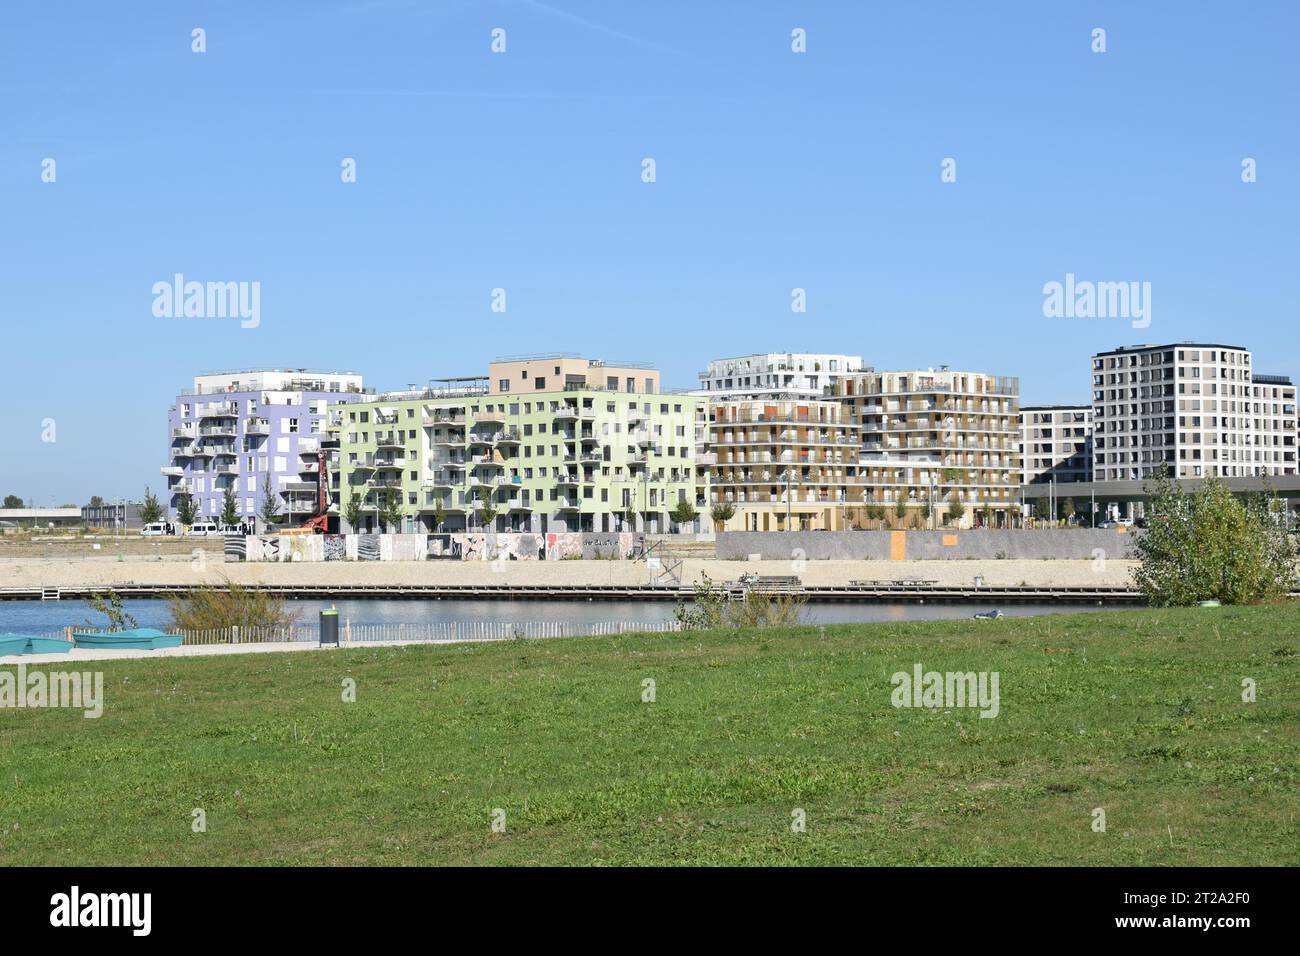 VIENNA, AUSTRIA - OCTOBER 2, 2023: Residential buildings and the lake in Seestadt Aspern, one of Europe's largest urban development areas. Stock Photo